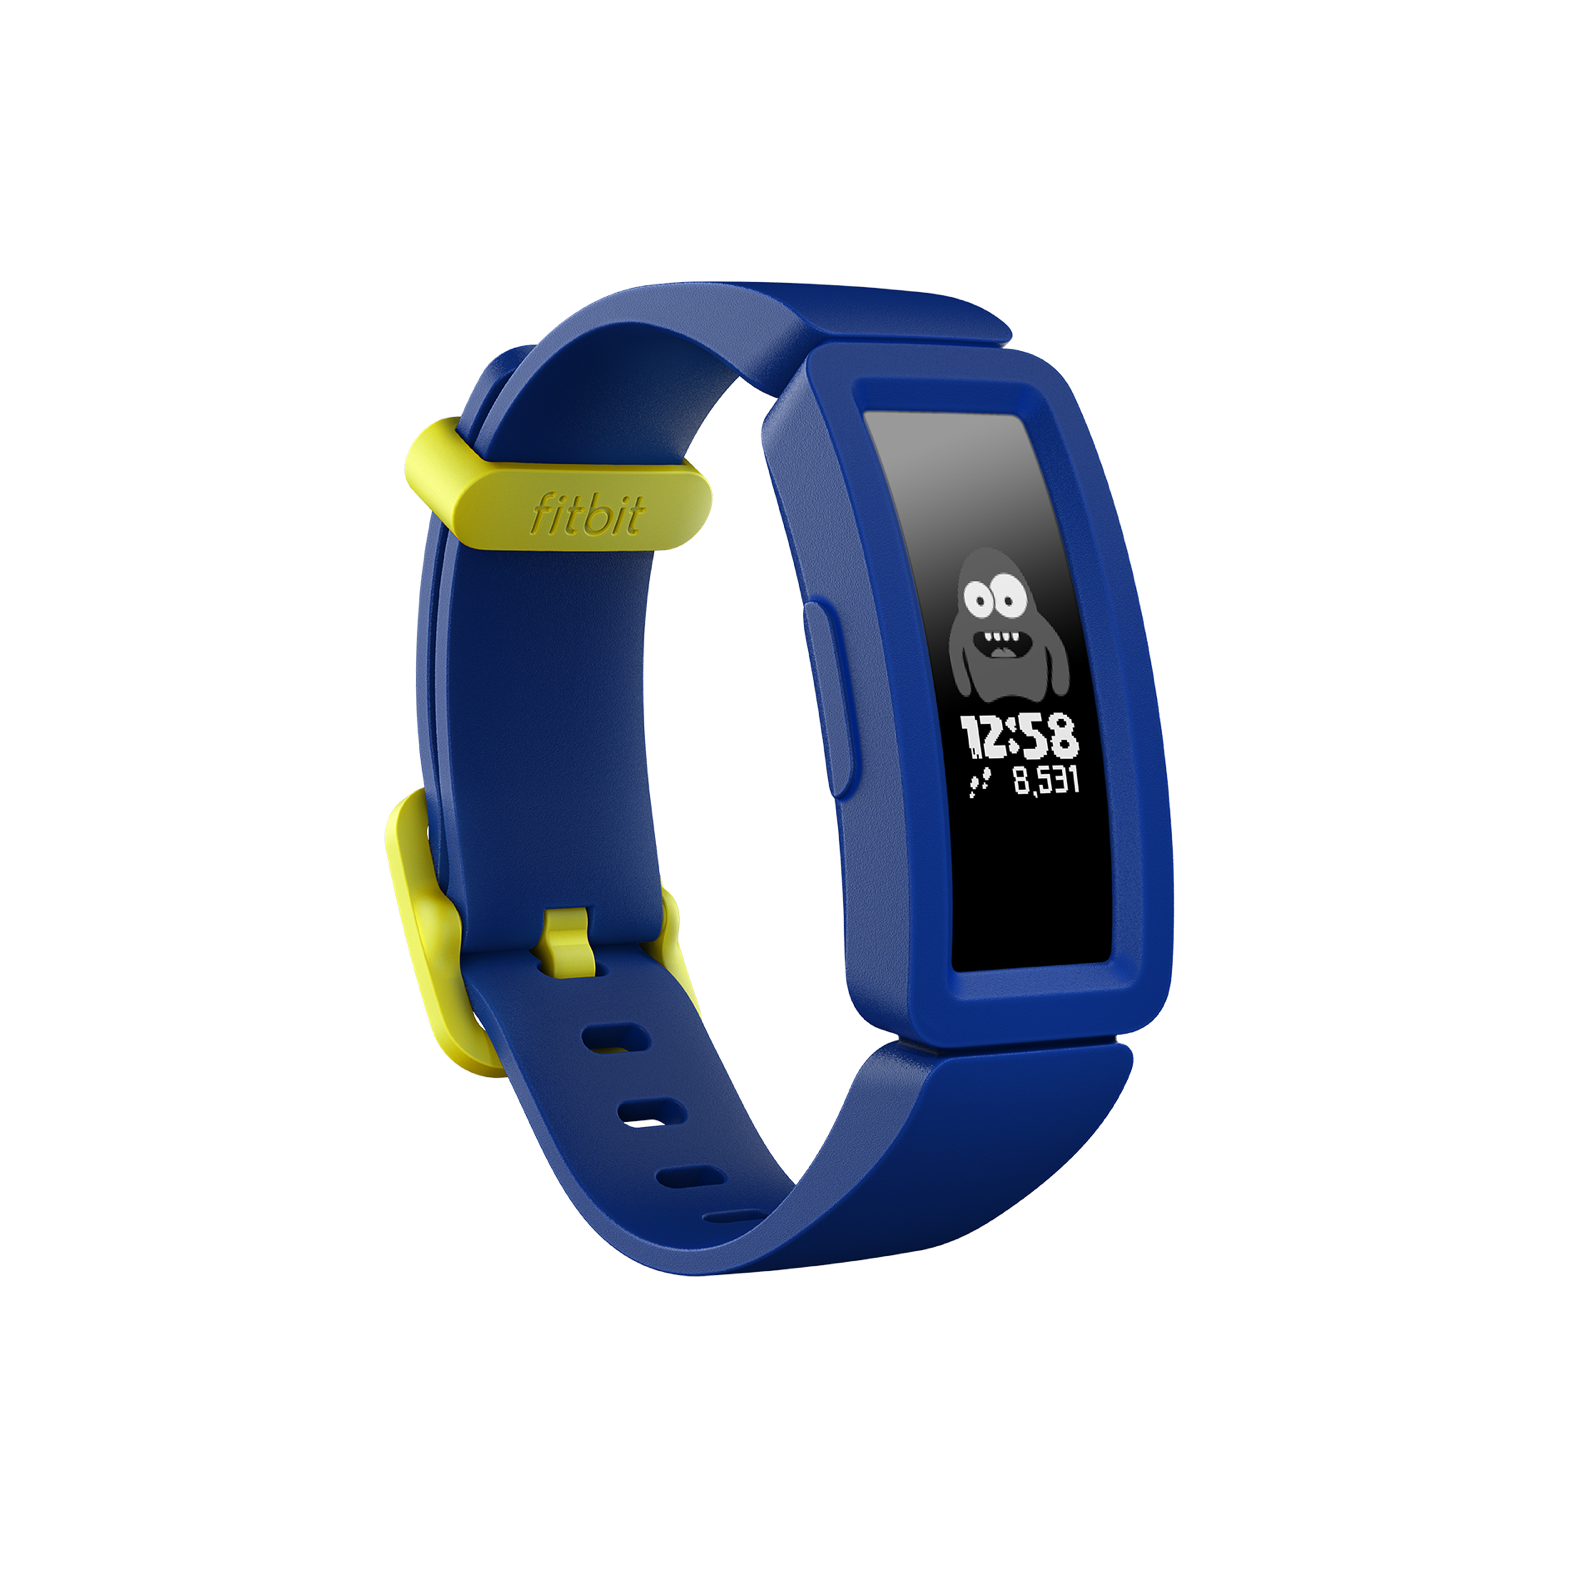 Fitbit Ace 2 Activity Tracker for Kids 